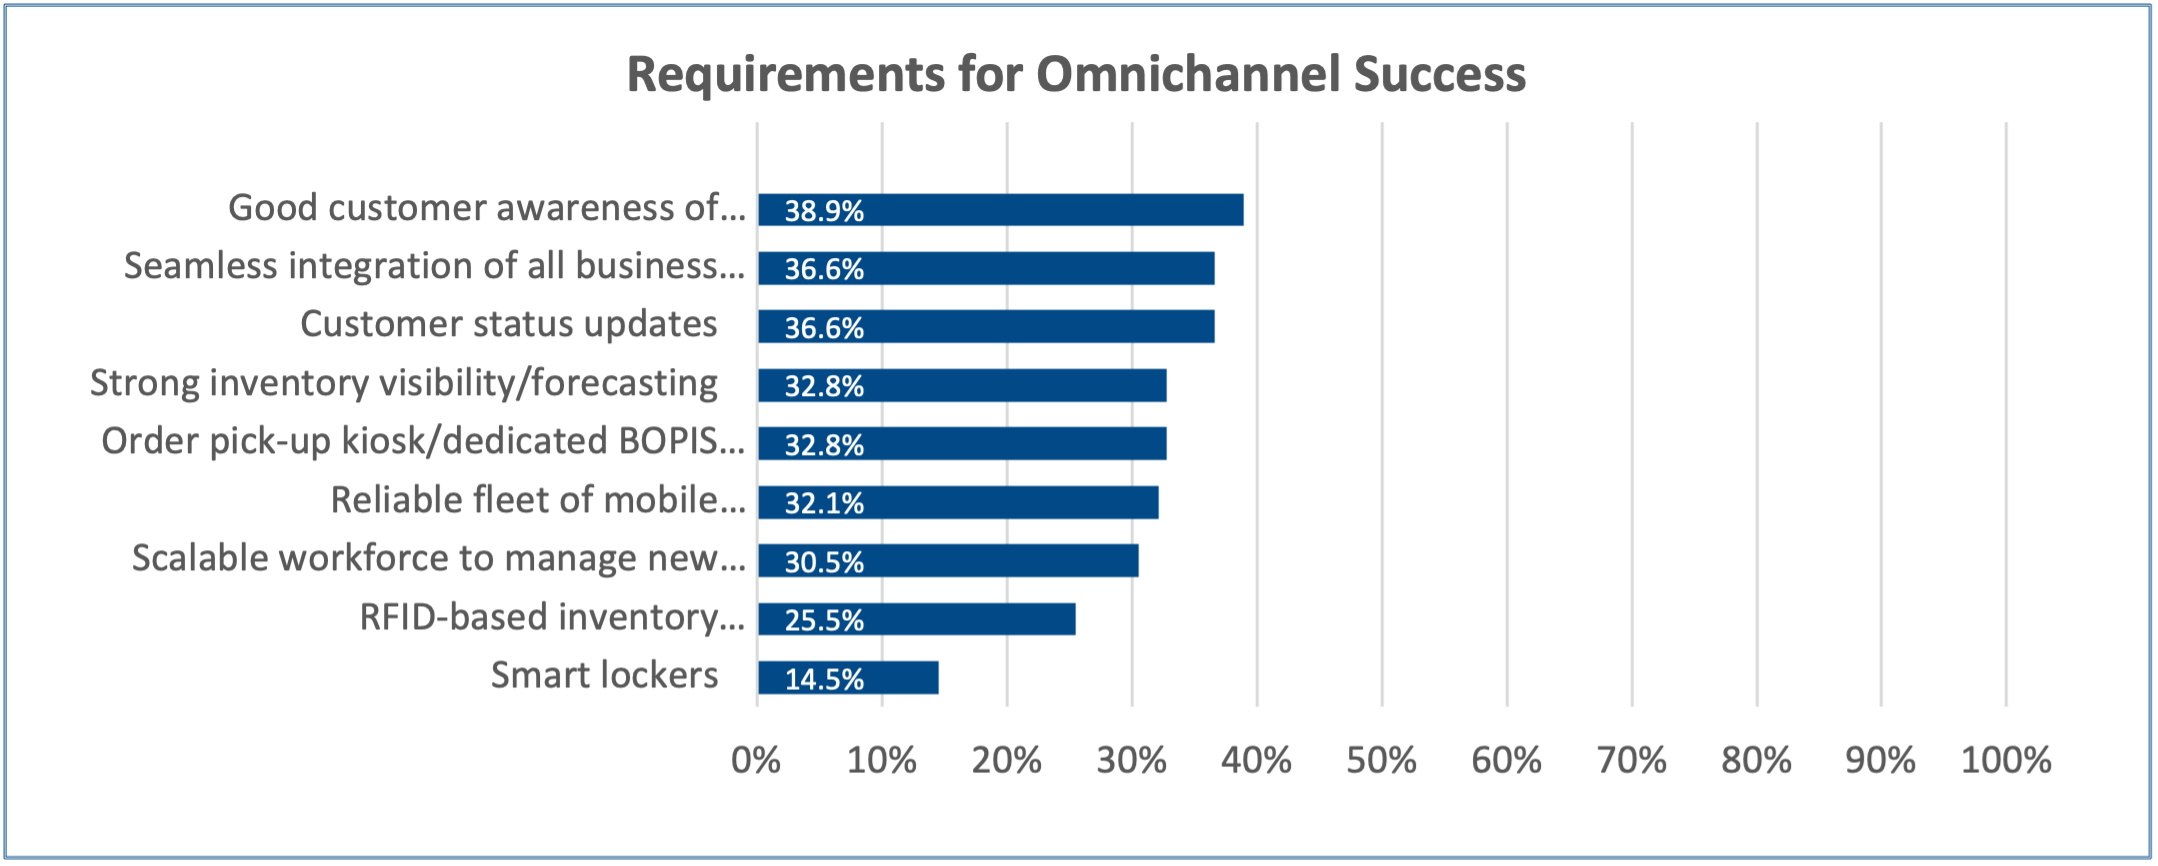 A graph showing the Requirements for Omnichannel Success